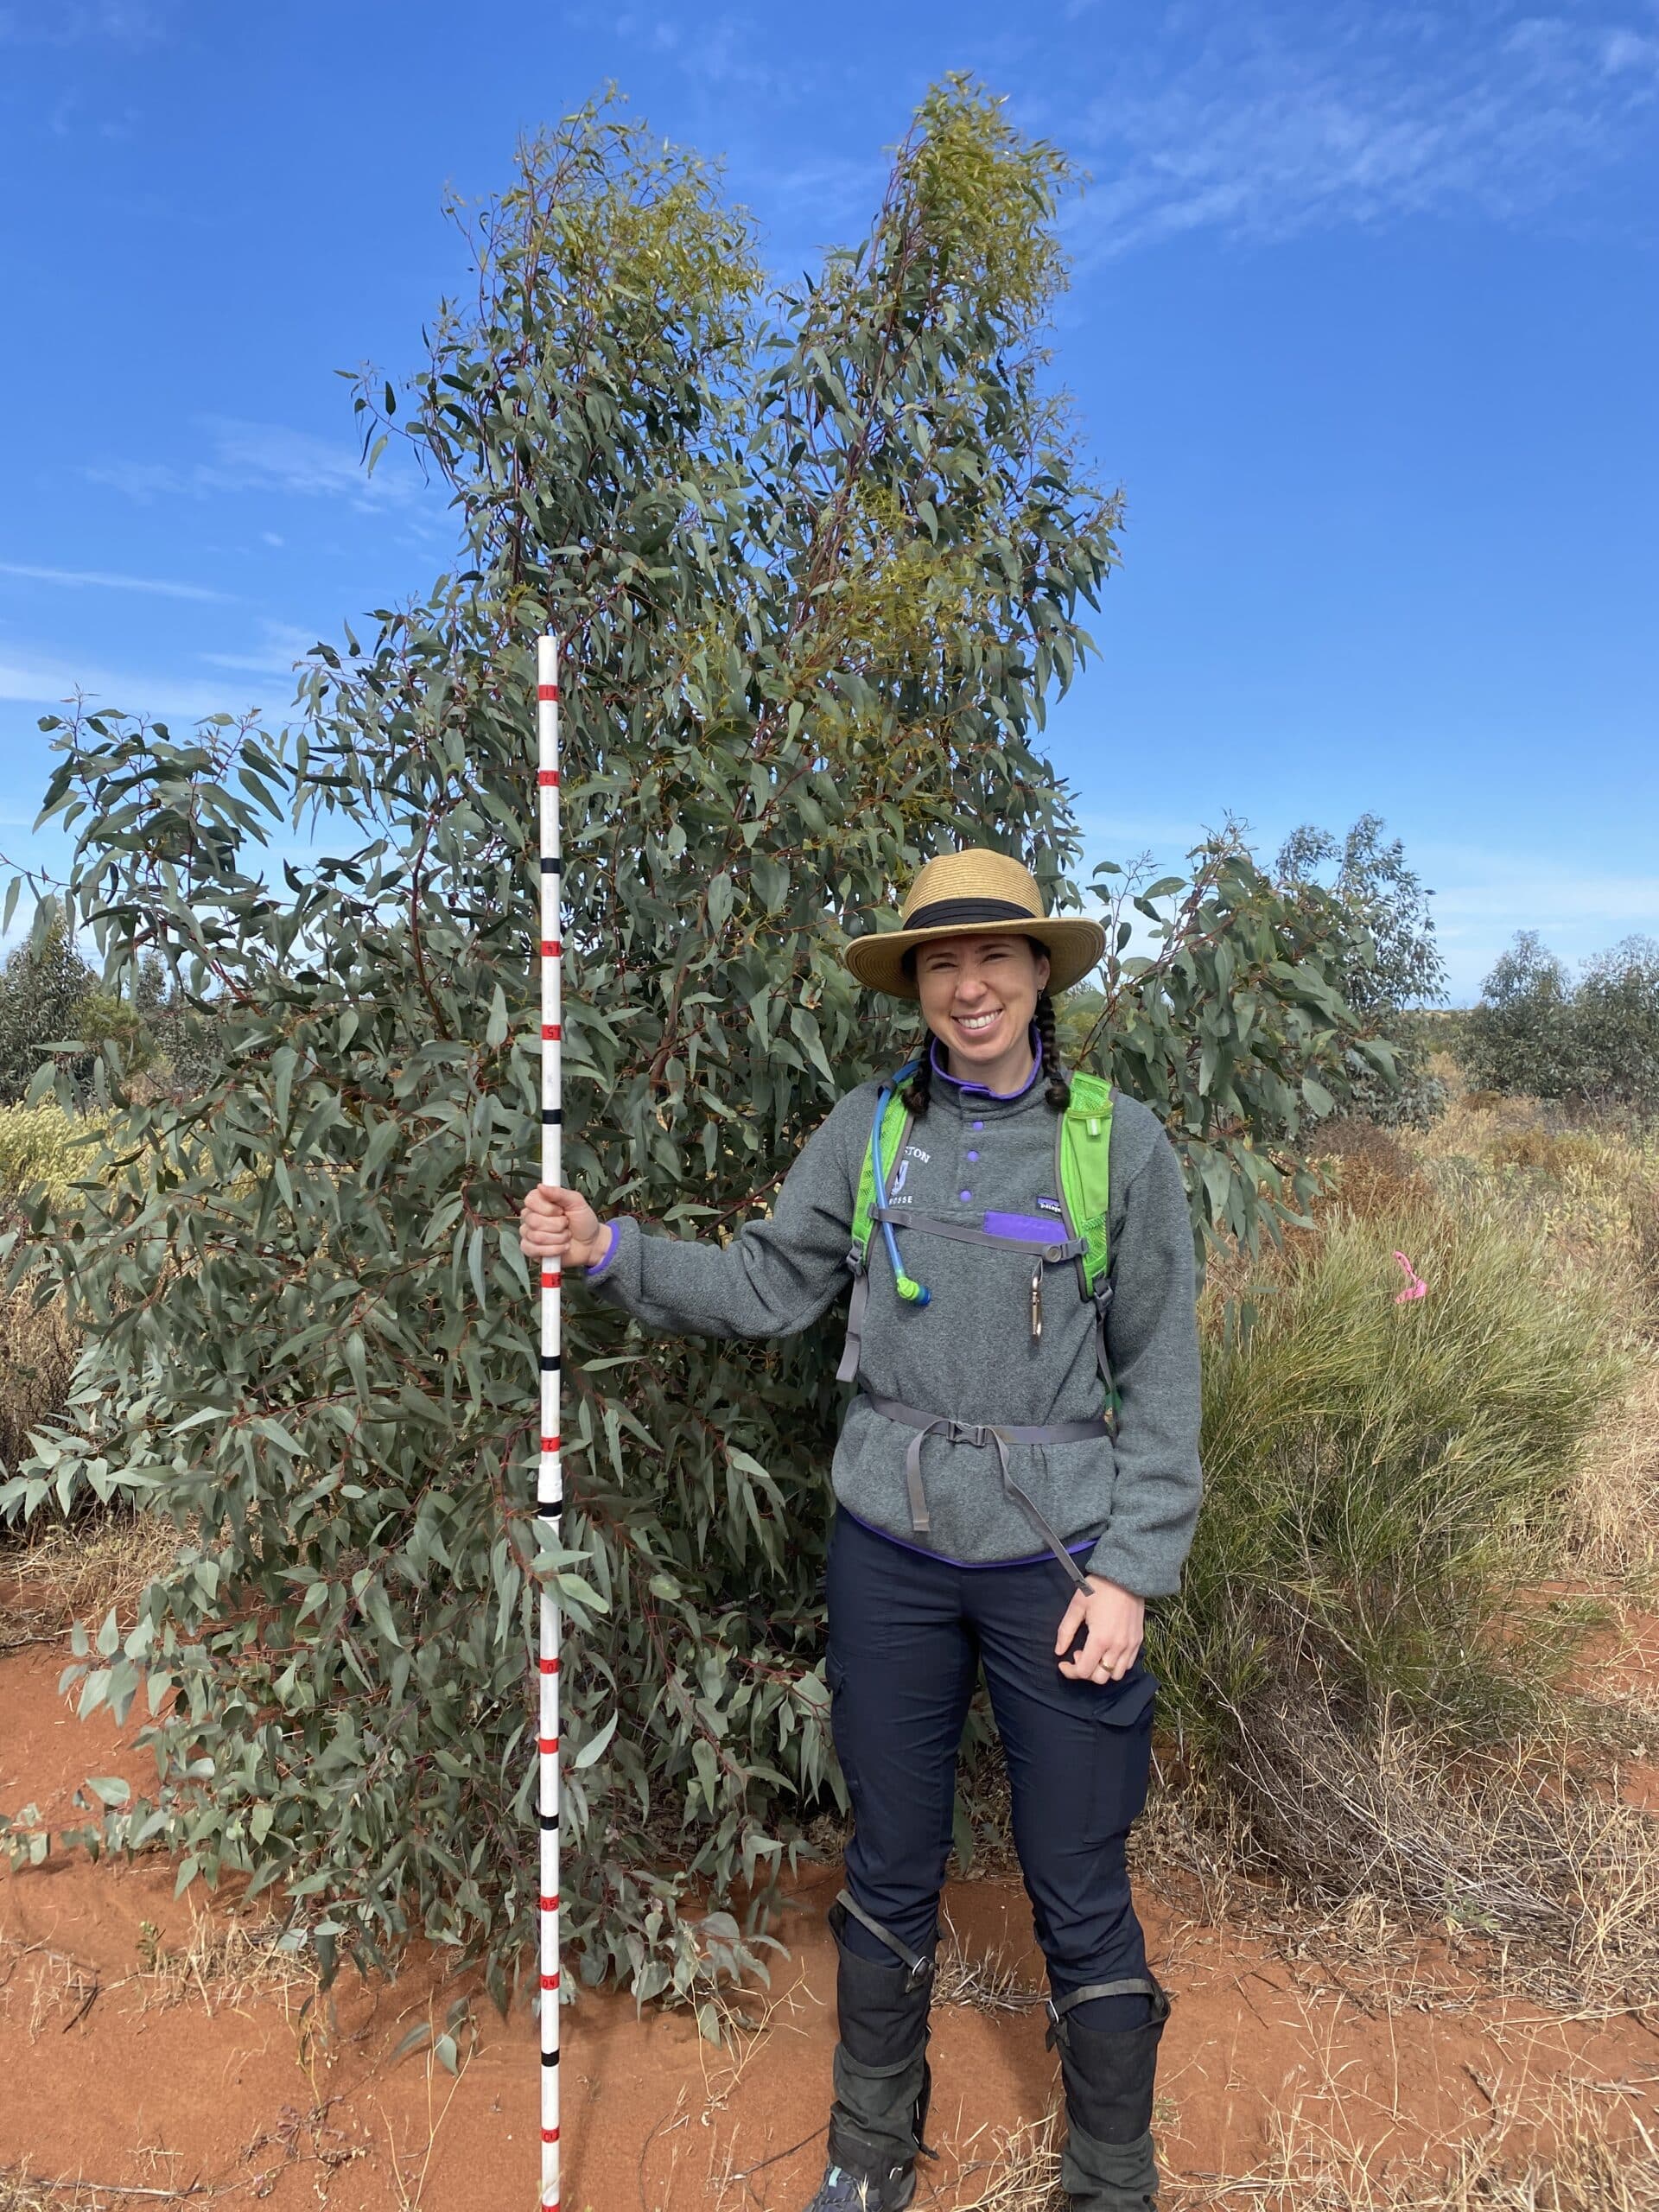 Woman standing in front of a eucalyptus tree holding a tree measuring stick